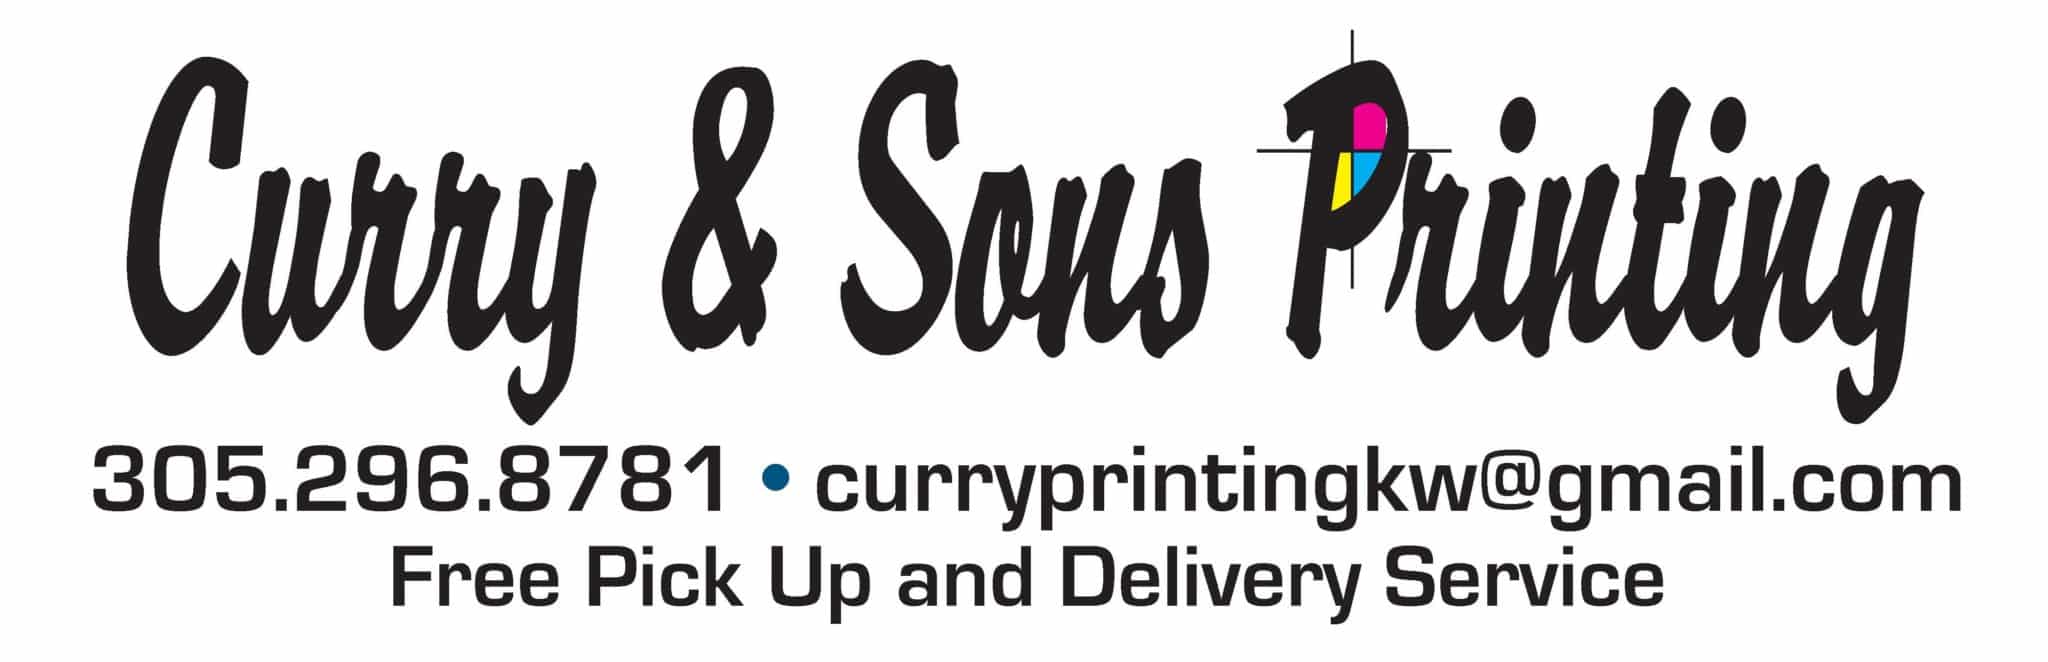 https://fkspca.org/wp-content/uploads/2023/03/Curry-Logo-scaled.jpg